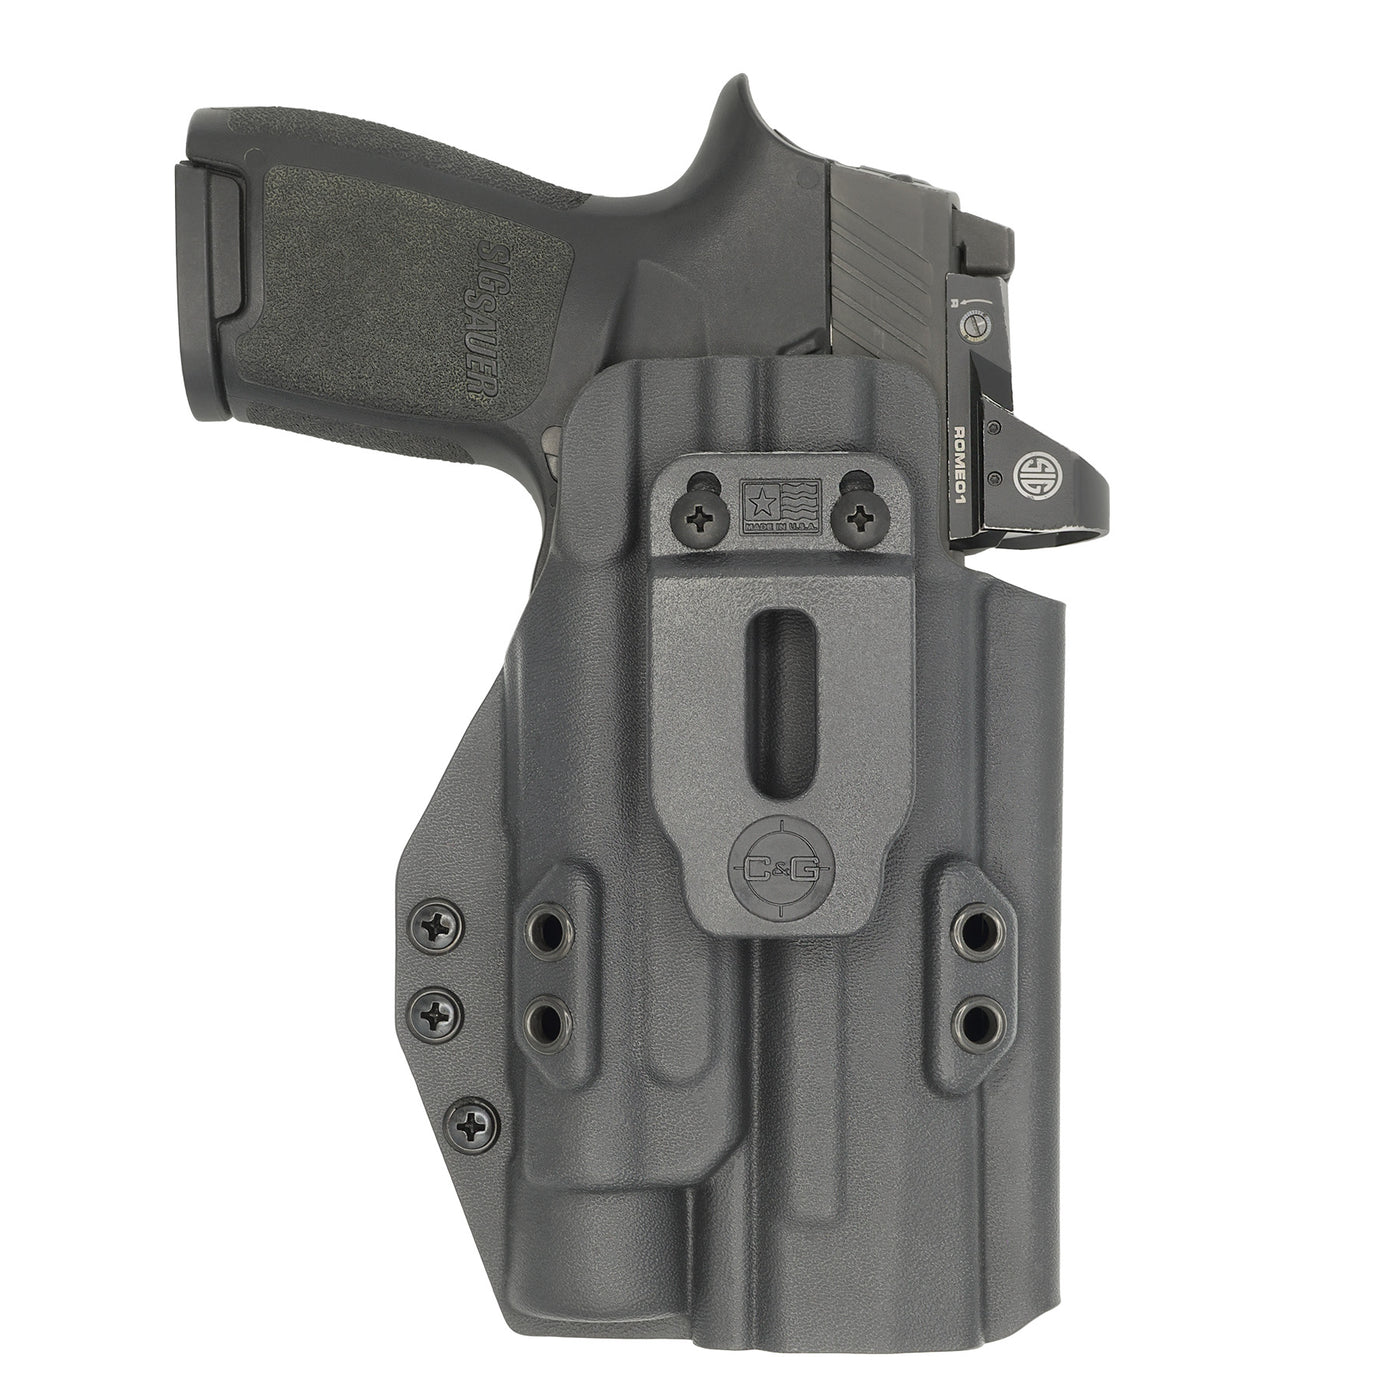 C&G Holsters Quickship IWB Tactical SIG P320/c Streamlight TLR-1 in holstered position